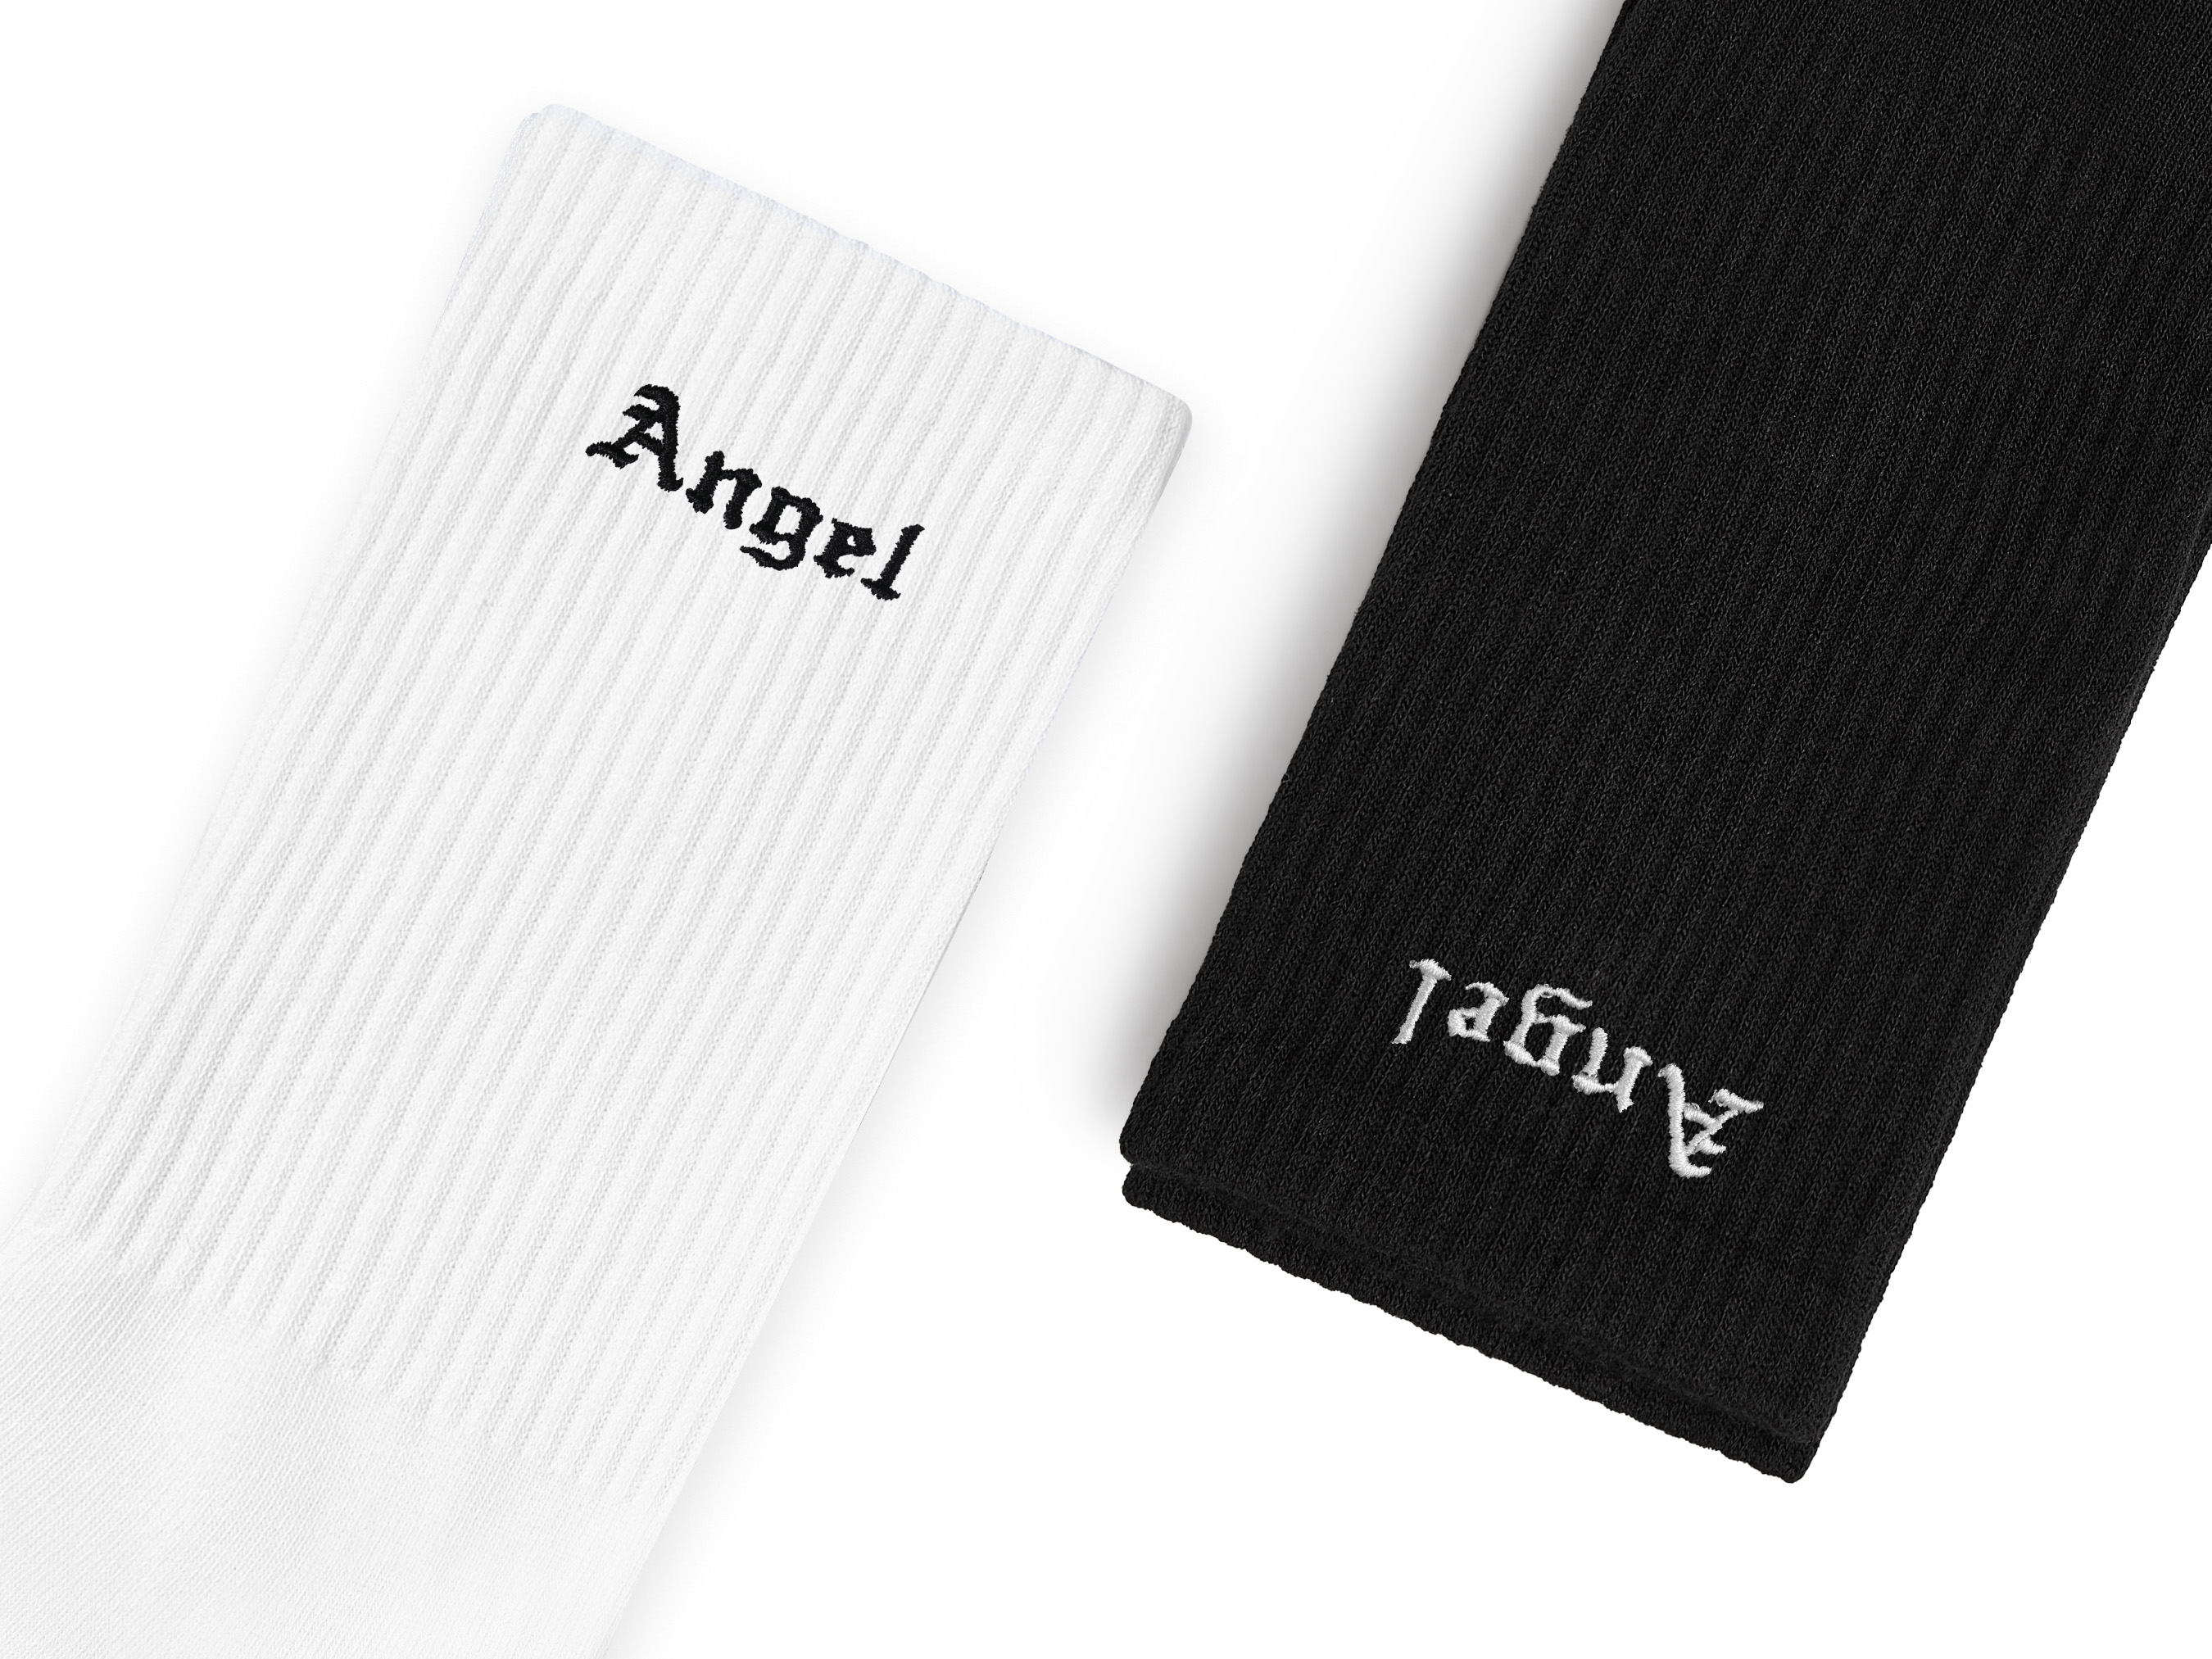 A flat-lay image of custom women white and black crew socks with 'Angels' text embroidered on them.